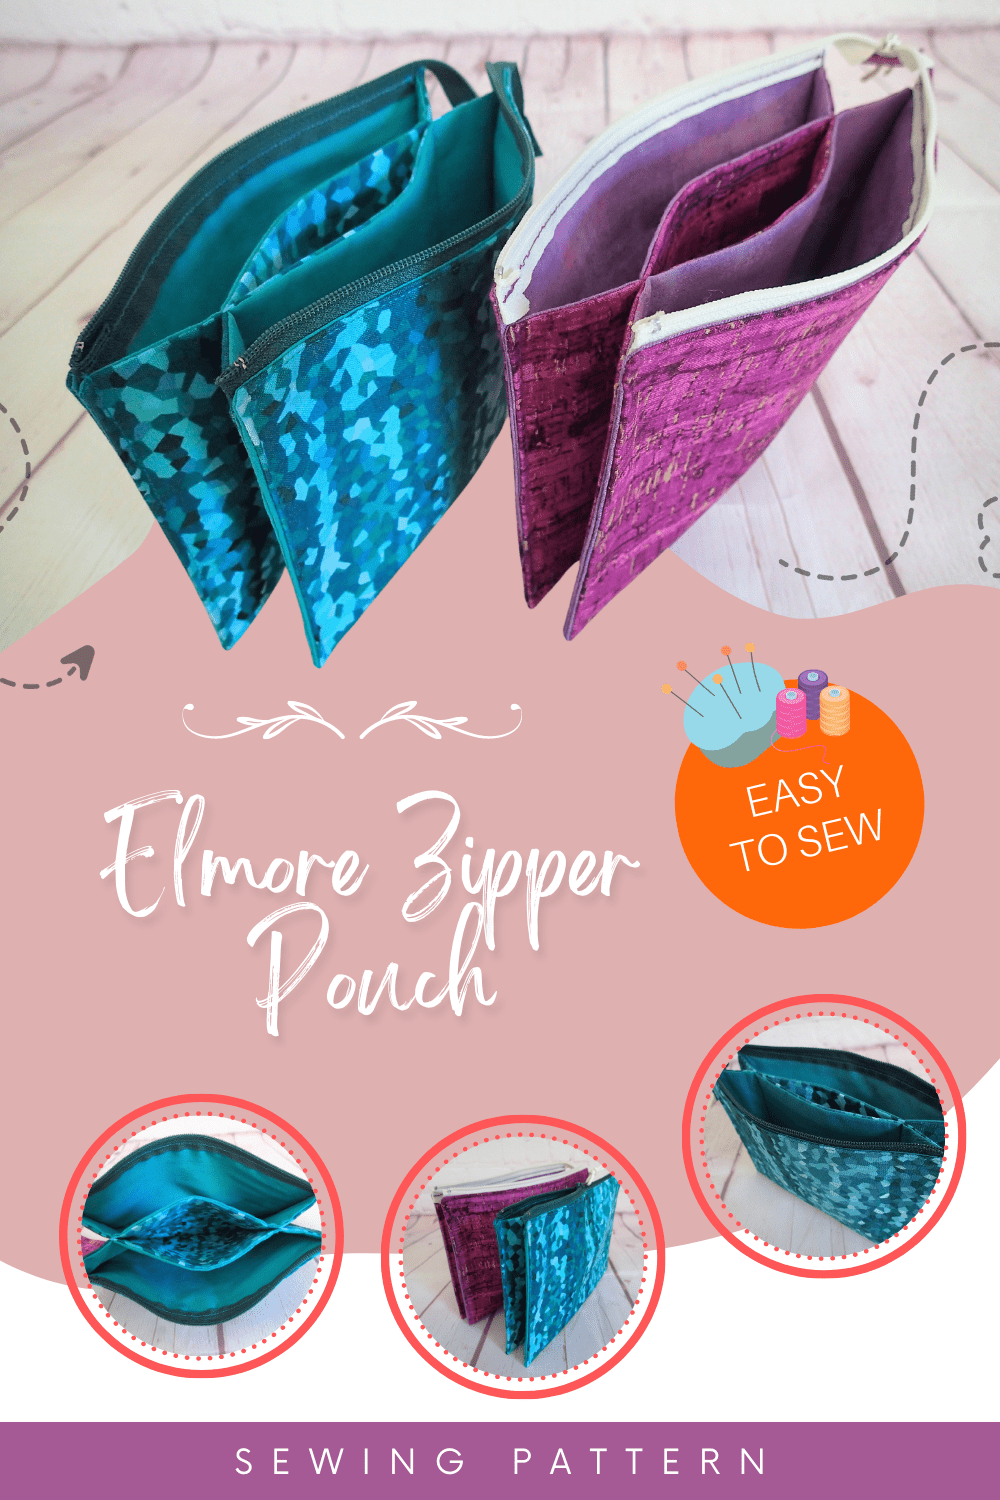 Elmore Zipper Pouch sewing pattern. An easy to sew zipper pouch for beginners. Easy zipper installation, no printed pattern pieces needed. This fully lined diy zipper bag is the ideal quick sew project, or sew to sell. Beginner friendly zipper bag to sew.